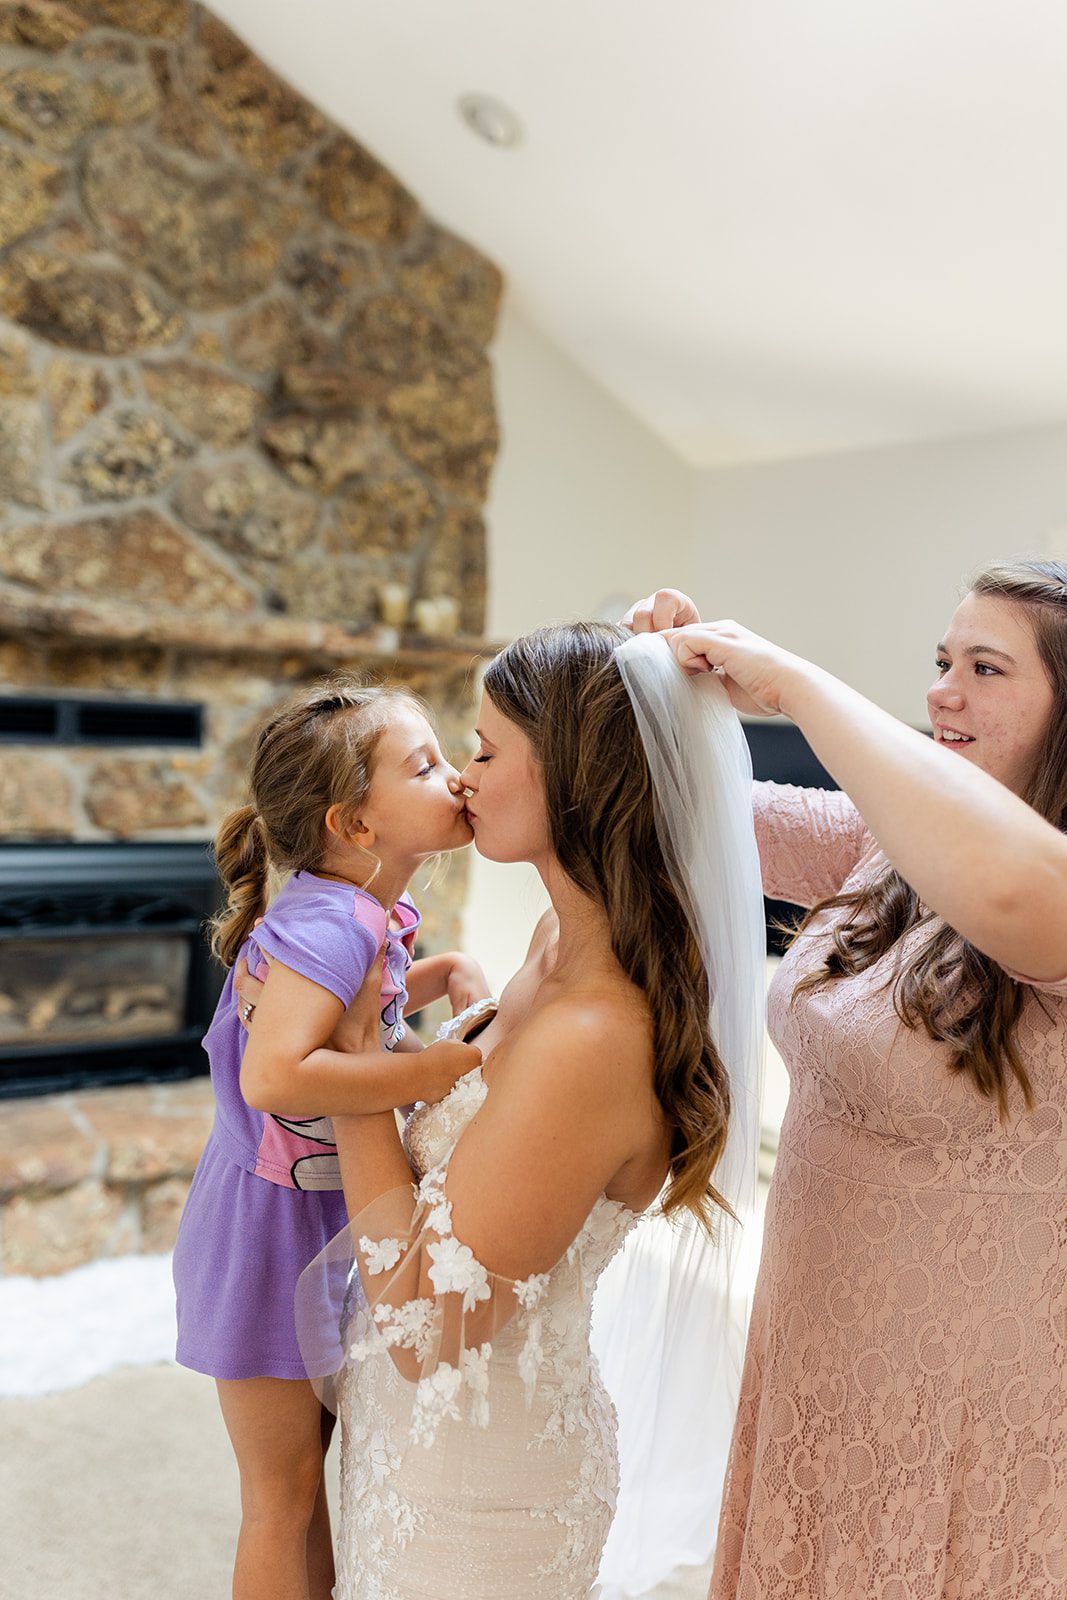 The beautiful bride kisses her little girl while getting ready, wearing her wedding dress.